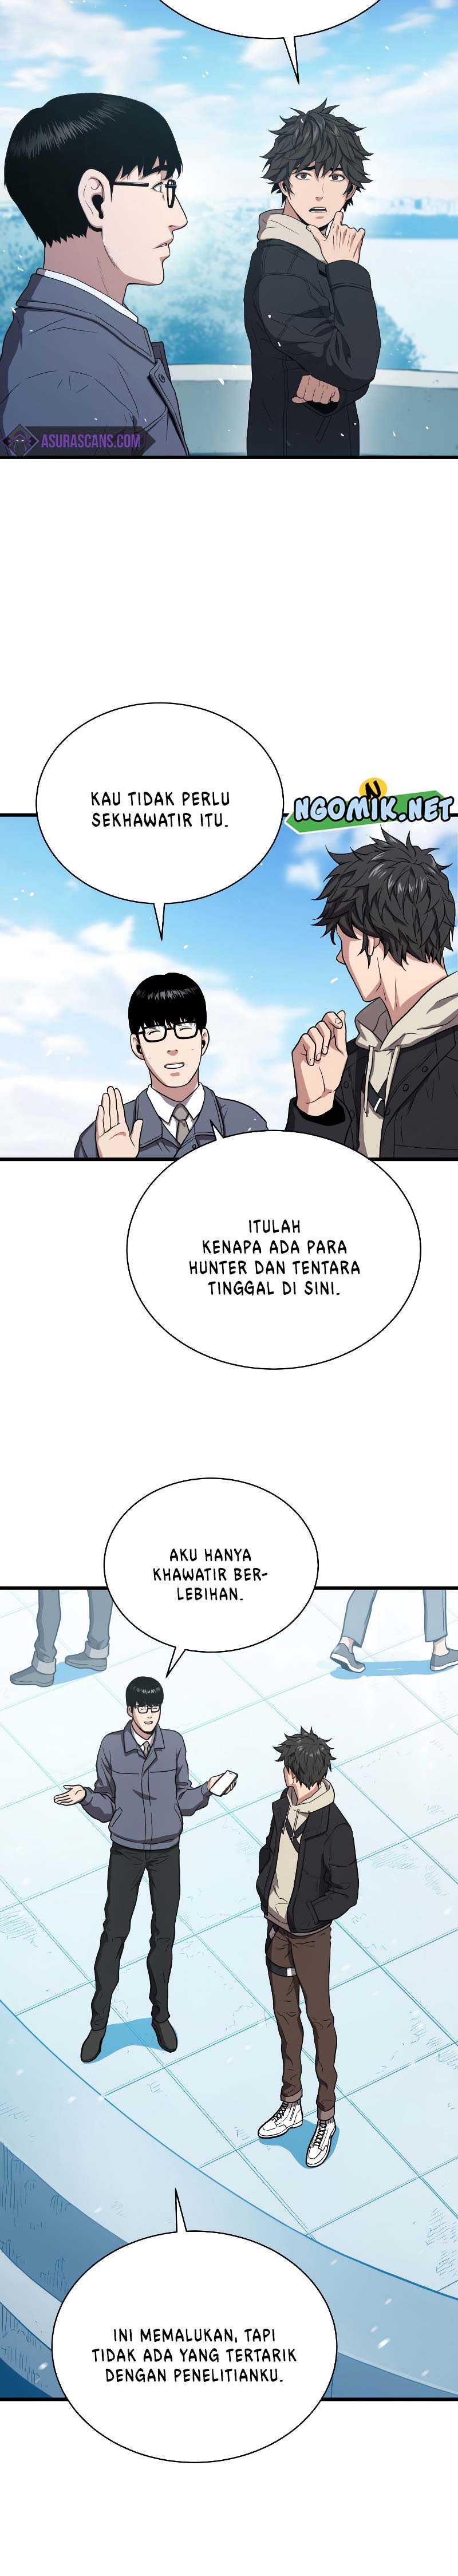 Hoarding in Hell Chapter 46